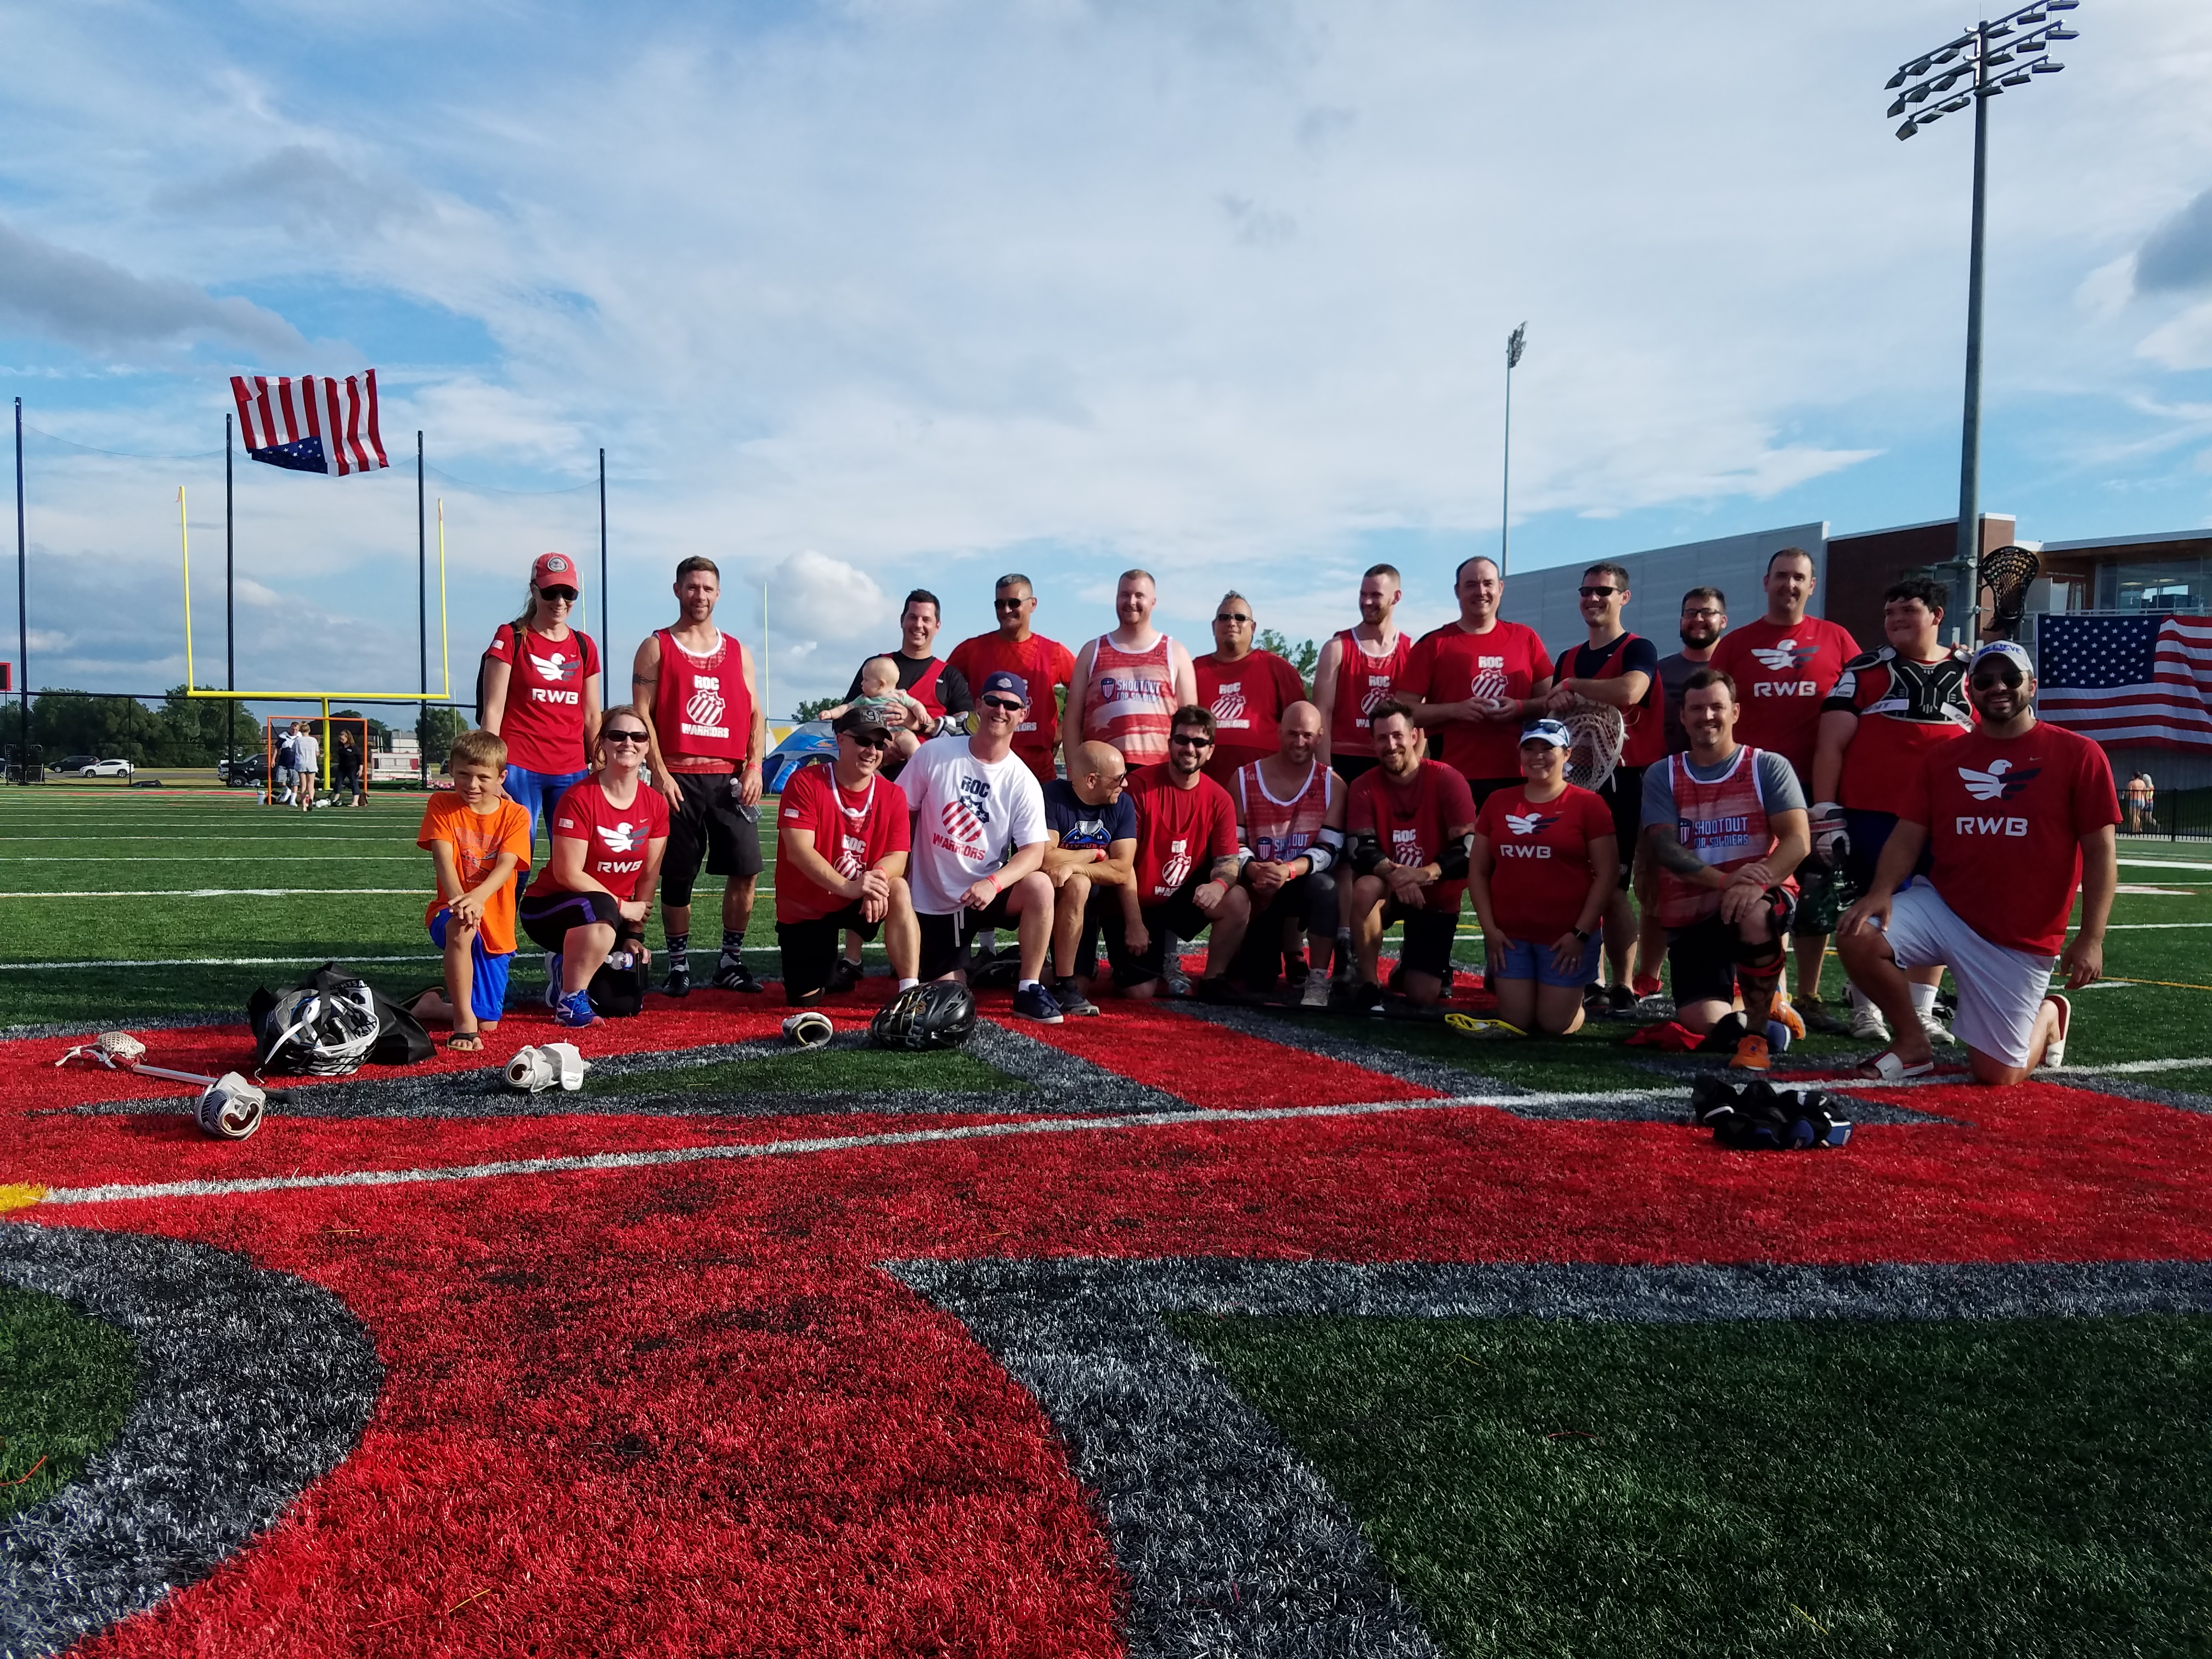 From Hockey to Lacrosse: How One Team of Veterans Tried Something New to Help Others